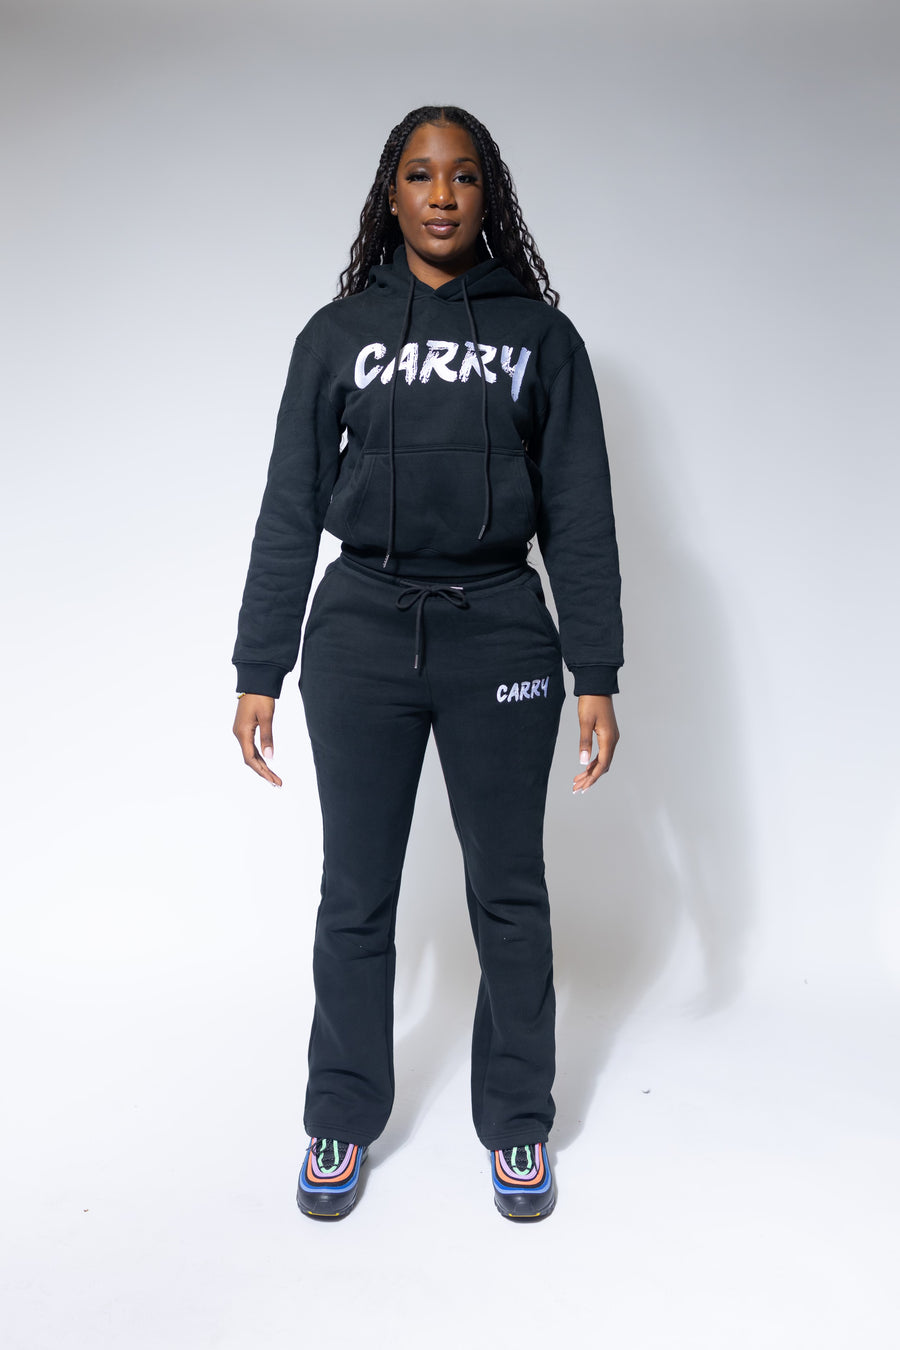 She Can Carry Too Sweatsuit